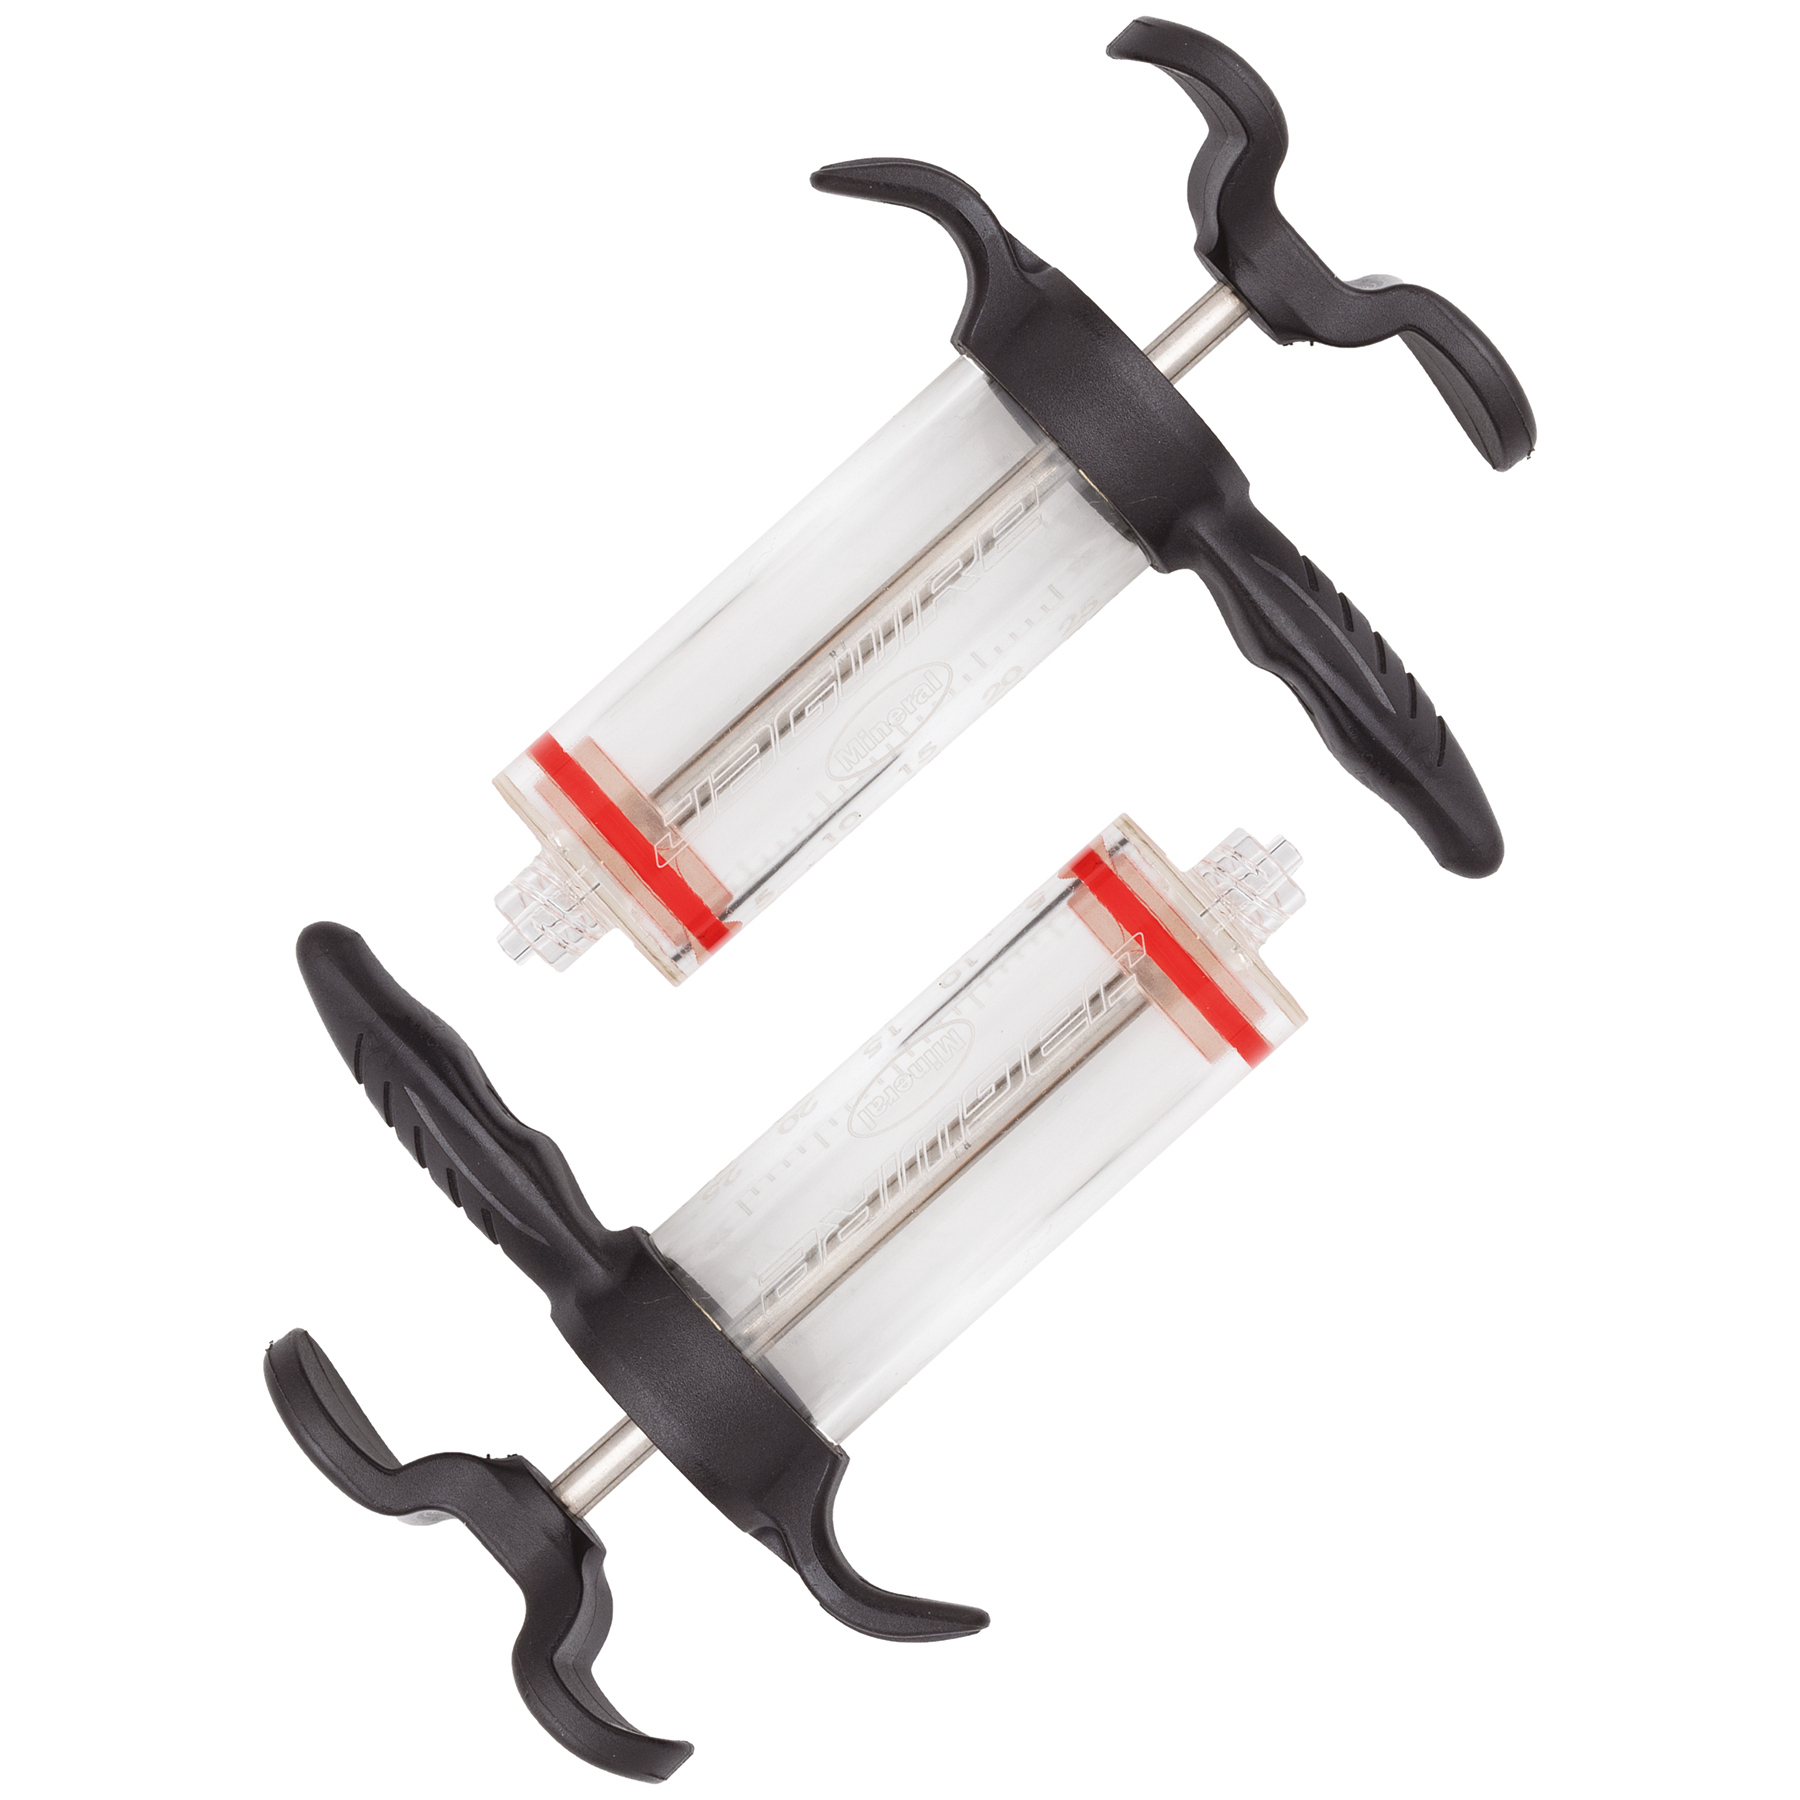 Image of Jagwire Elite Bleed Kit Replacement Syringes (Pair) - Mineral Oil (red seals)